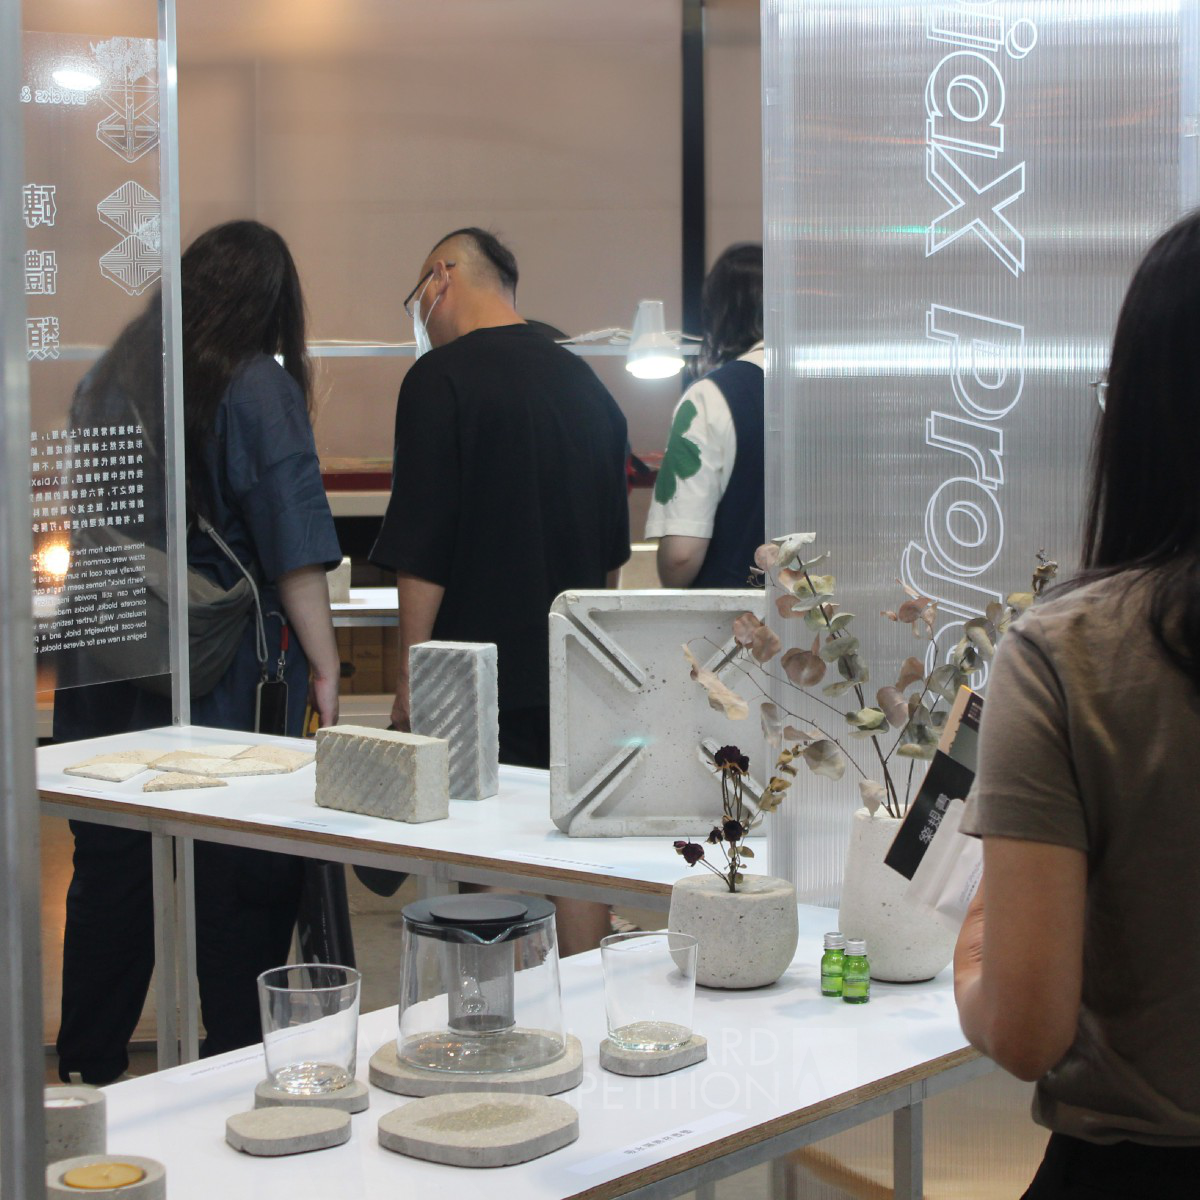 Leafer Circular Design wins Iron at the prestigious A' Trade Show Architecture, Interiors, and Exhibit Design Award with Diax Project  Showcase Exhibition.